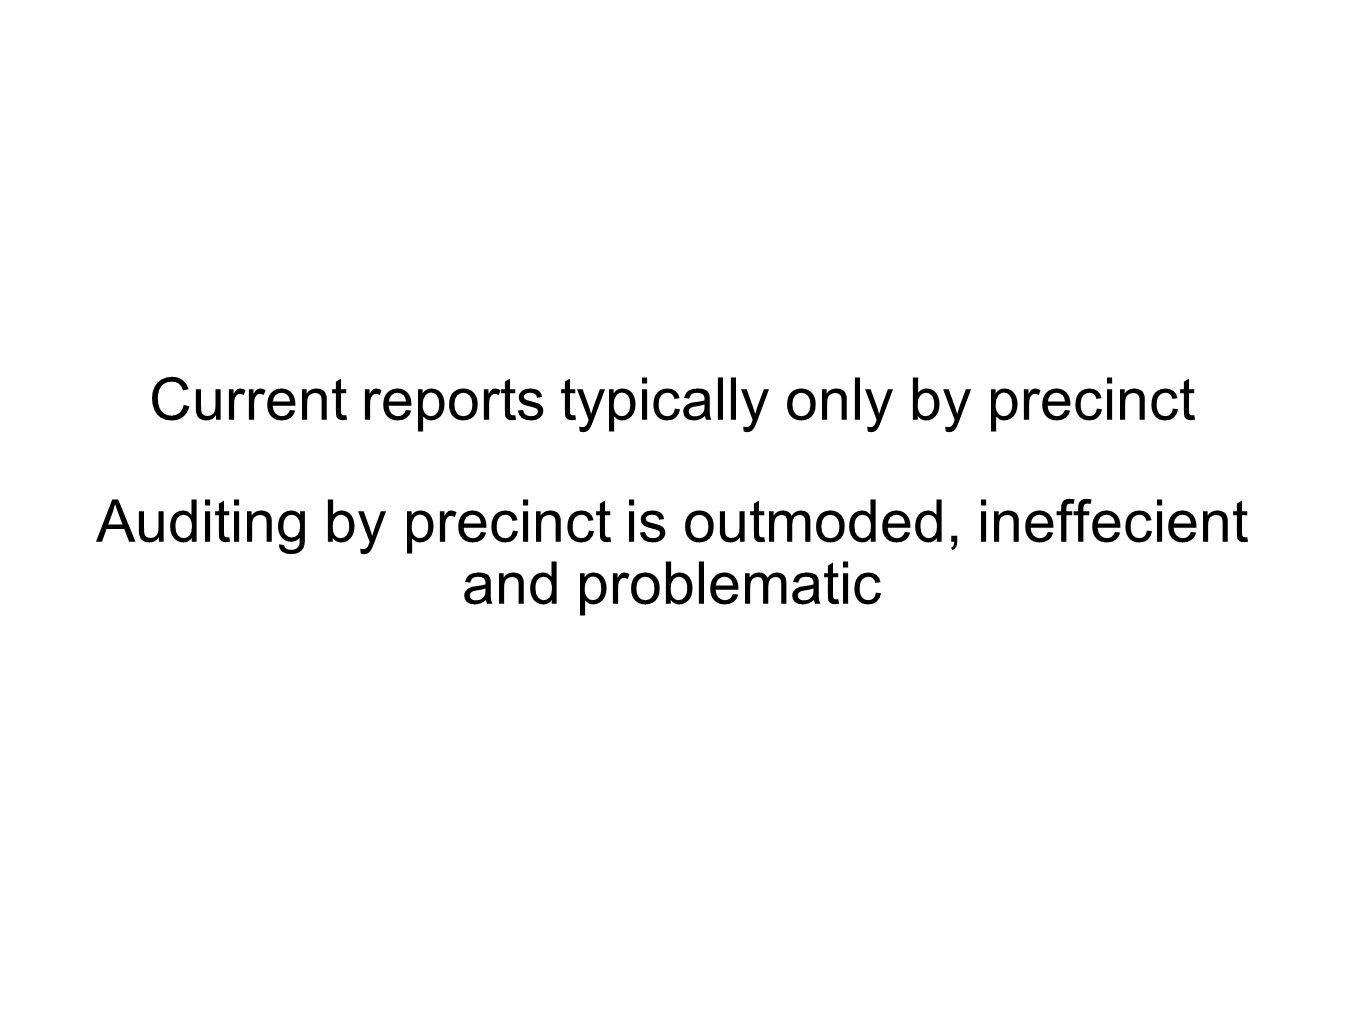 Current reports typically only by precinct Auditing by precinct is outmoded, ineffecient and problematic